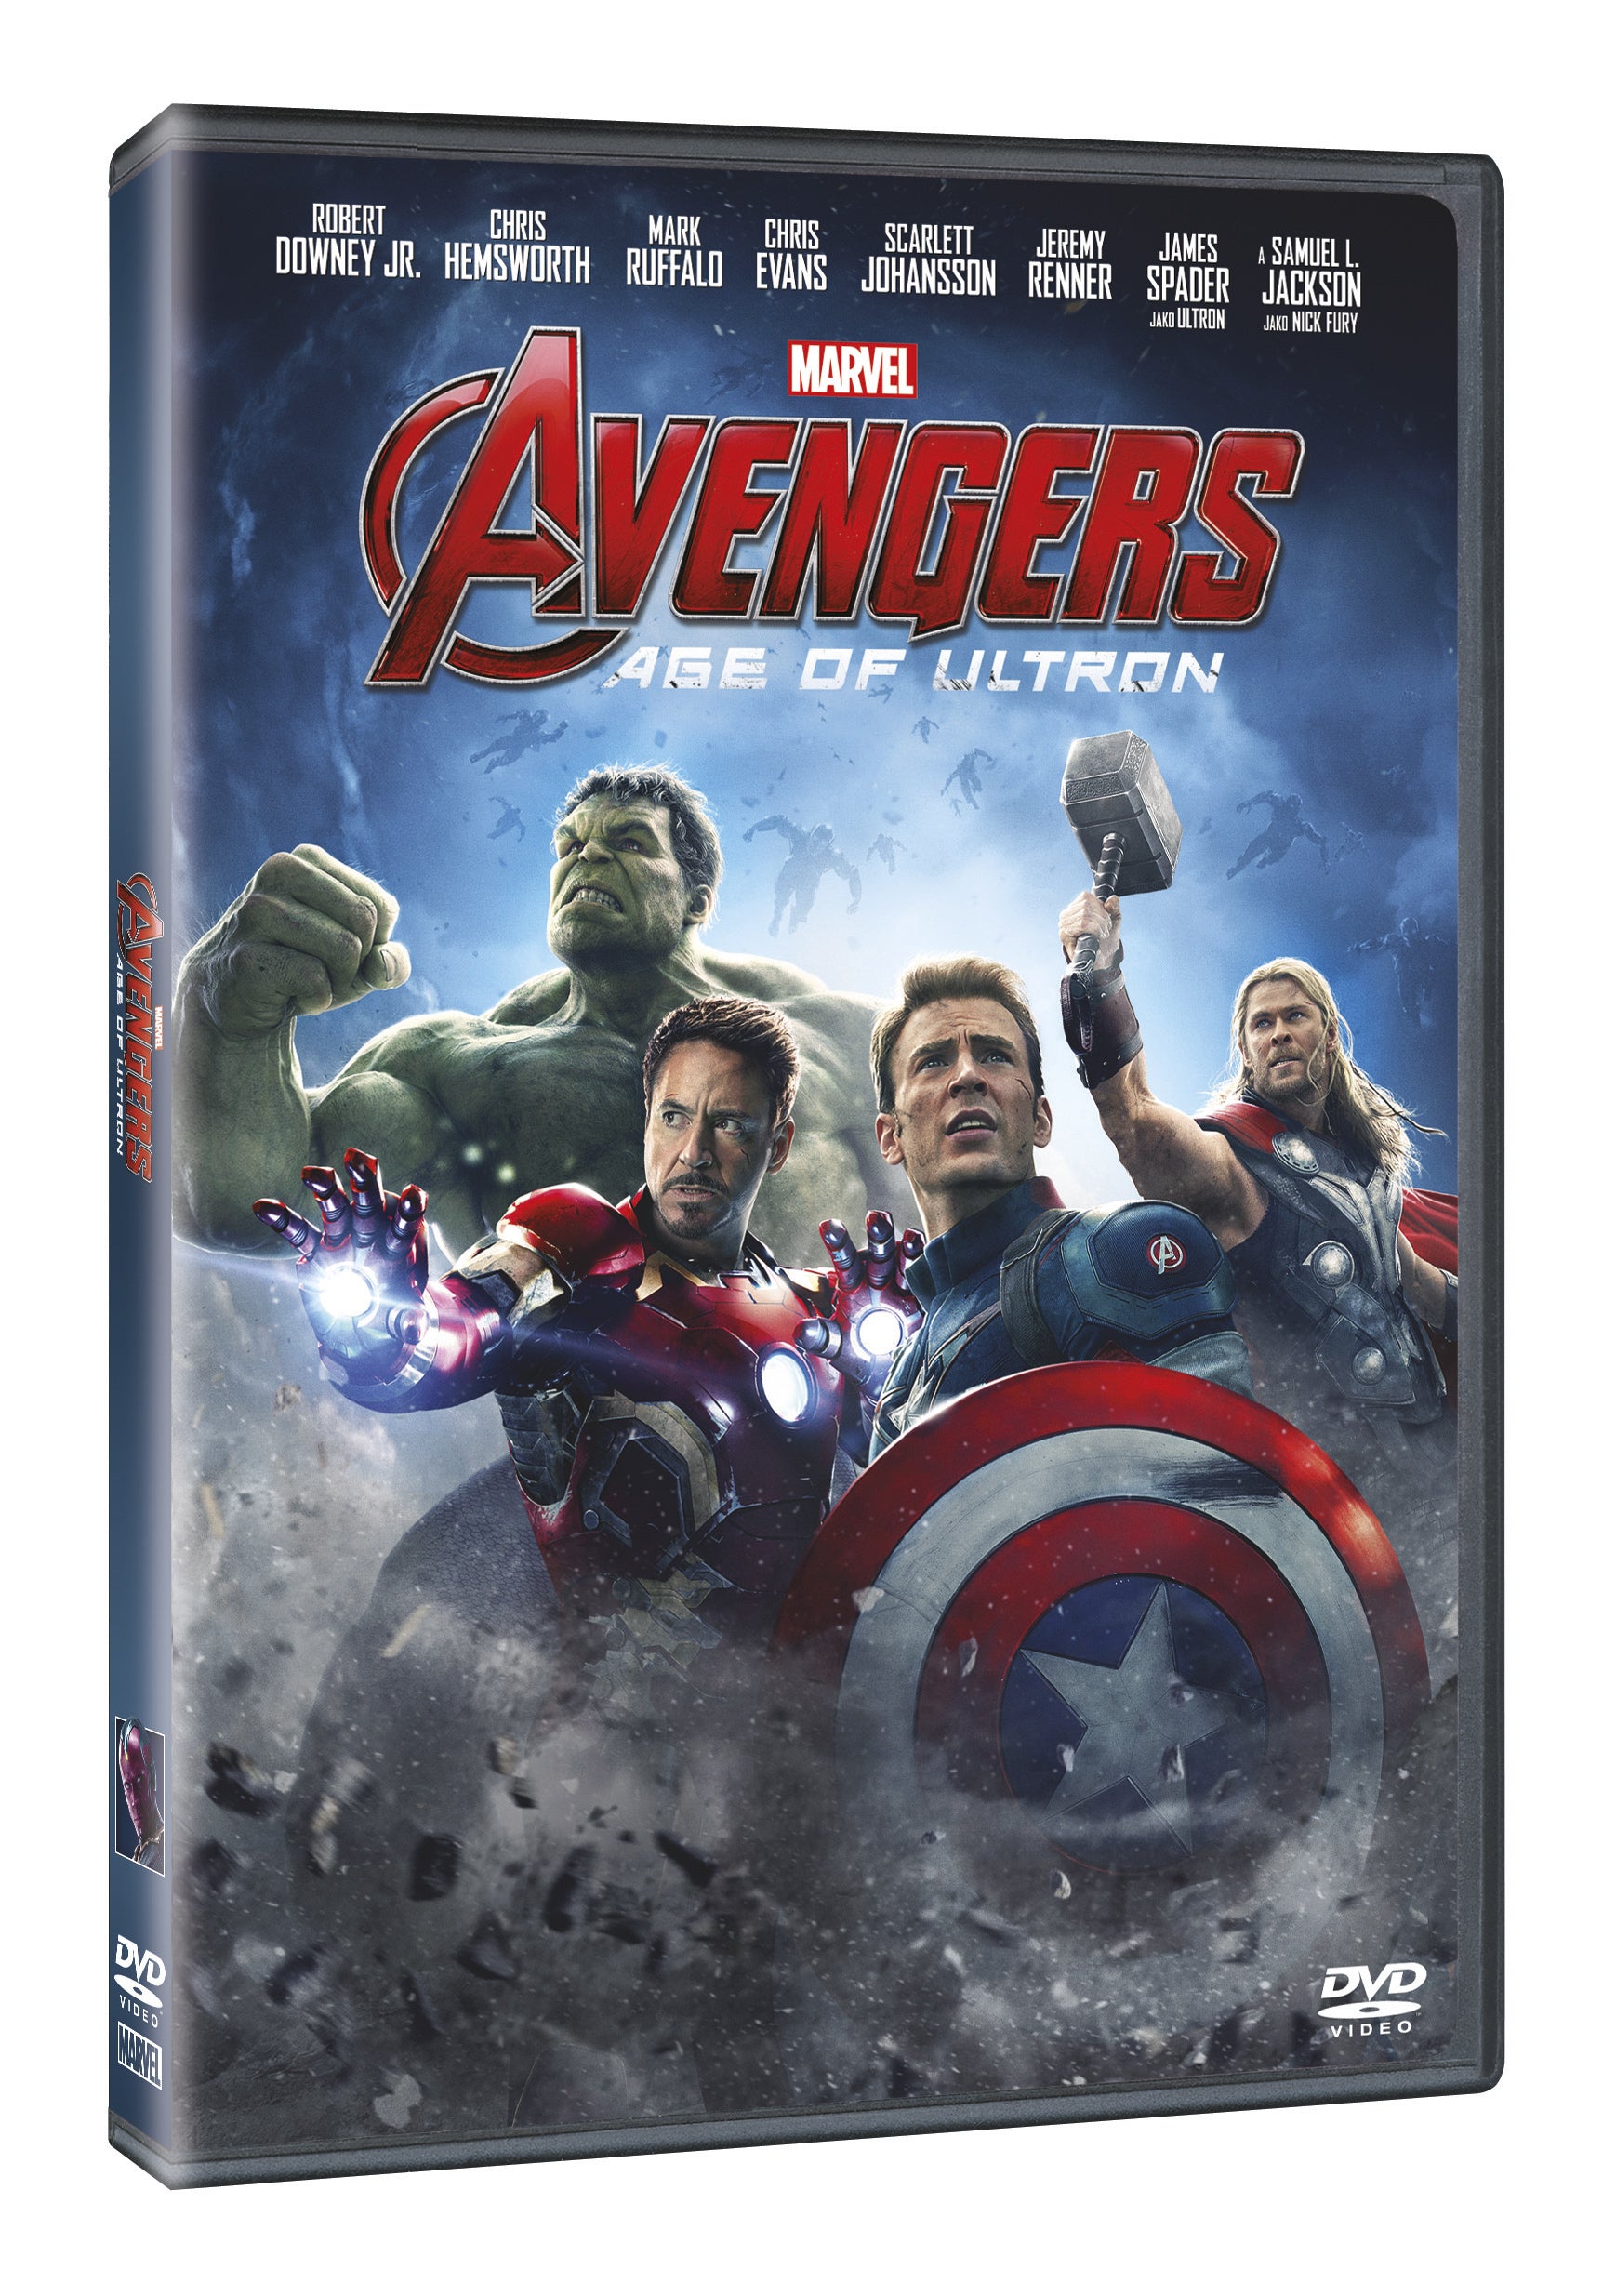 Avengers: Age of Ultron DVD / Avengers: Age of Ultron